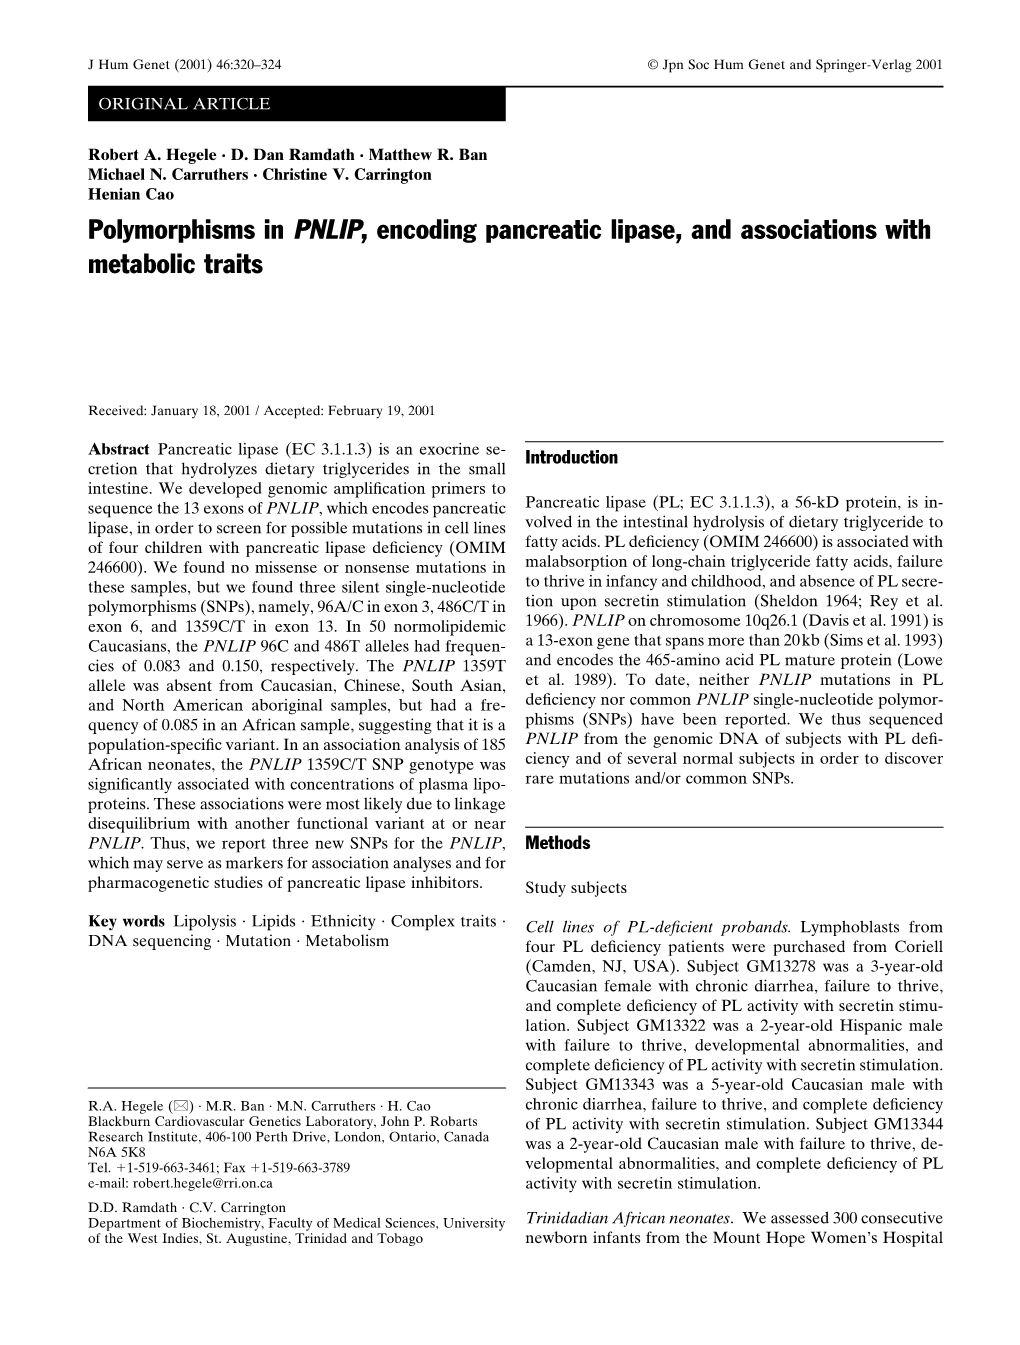 Polymorphisms in PNLIP, Encoding Pancreatic Lipase, and Associations with Metabolic Traits